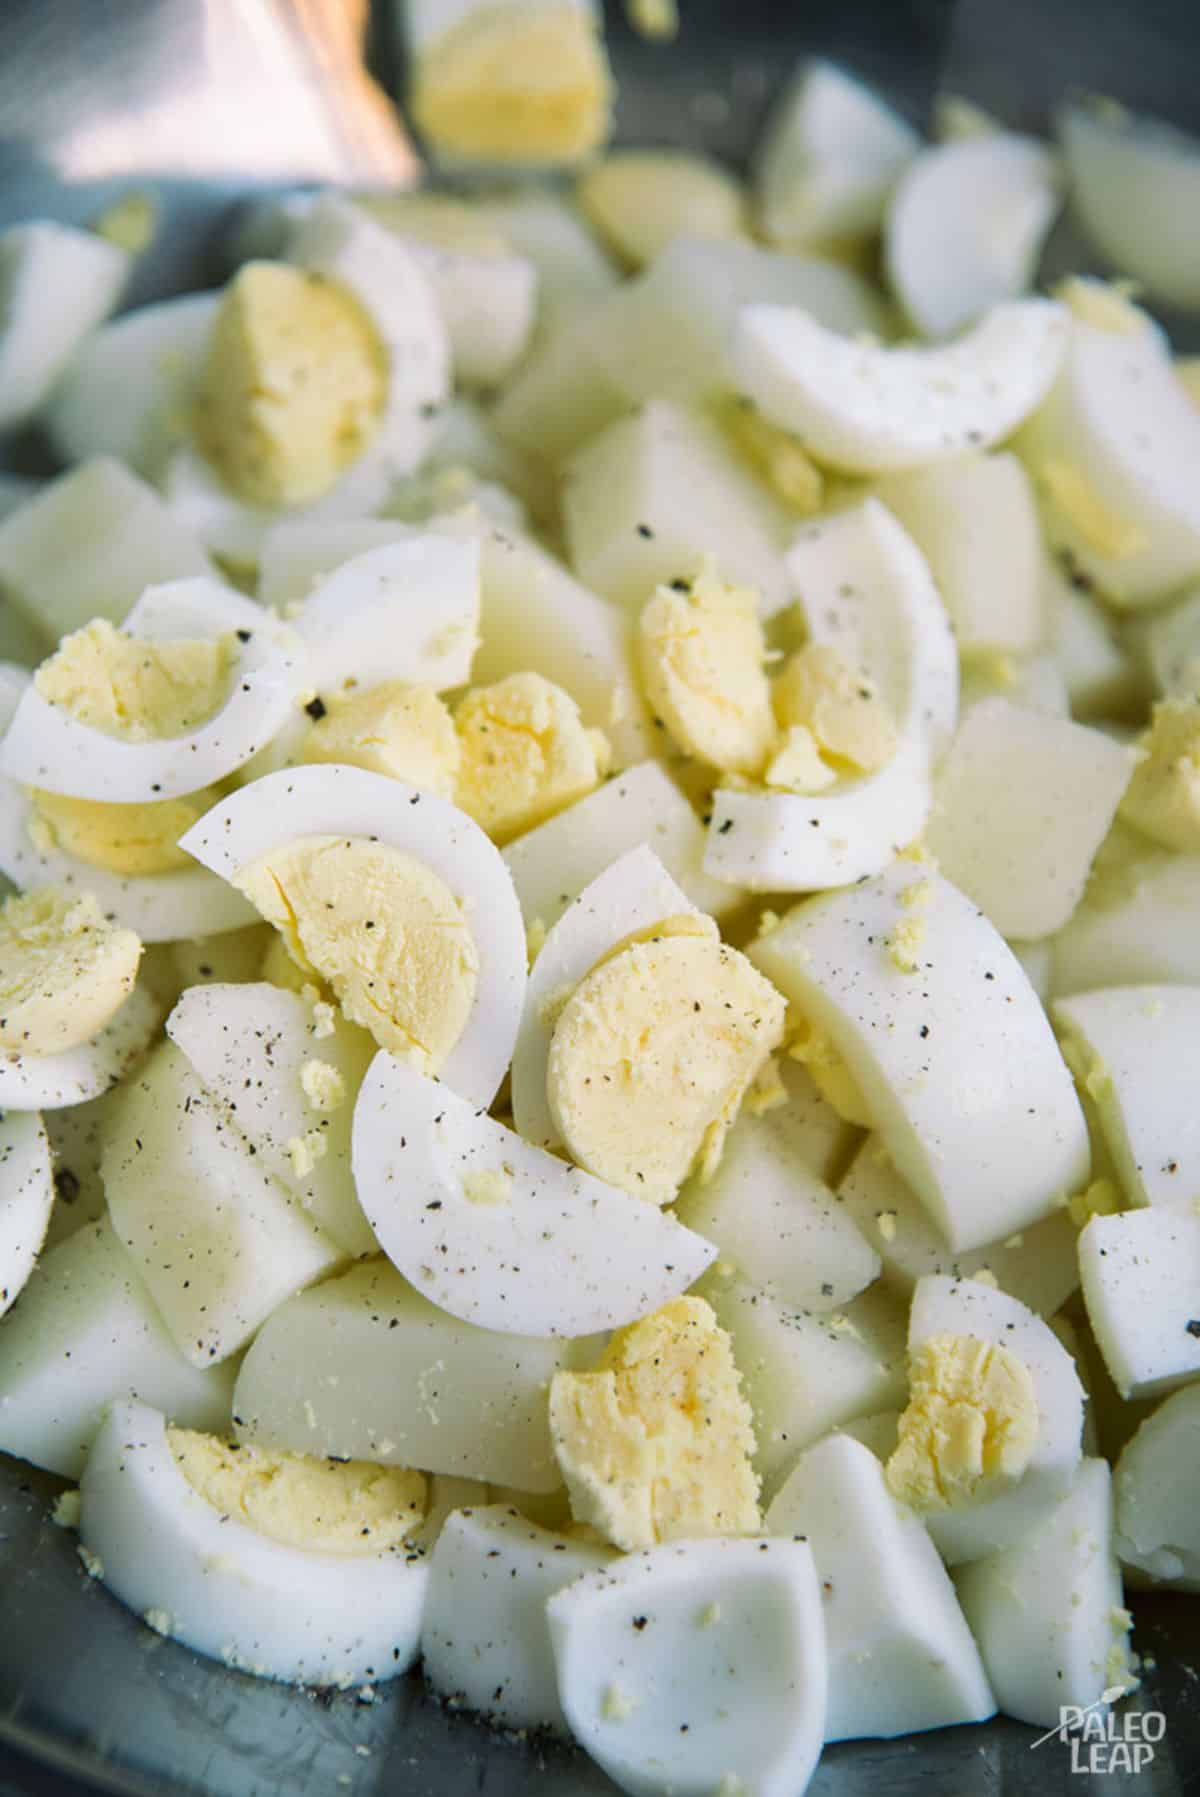 Chunky Egg And Potato Salad With Pickles Recipe Preparation